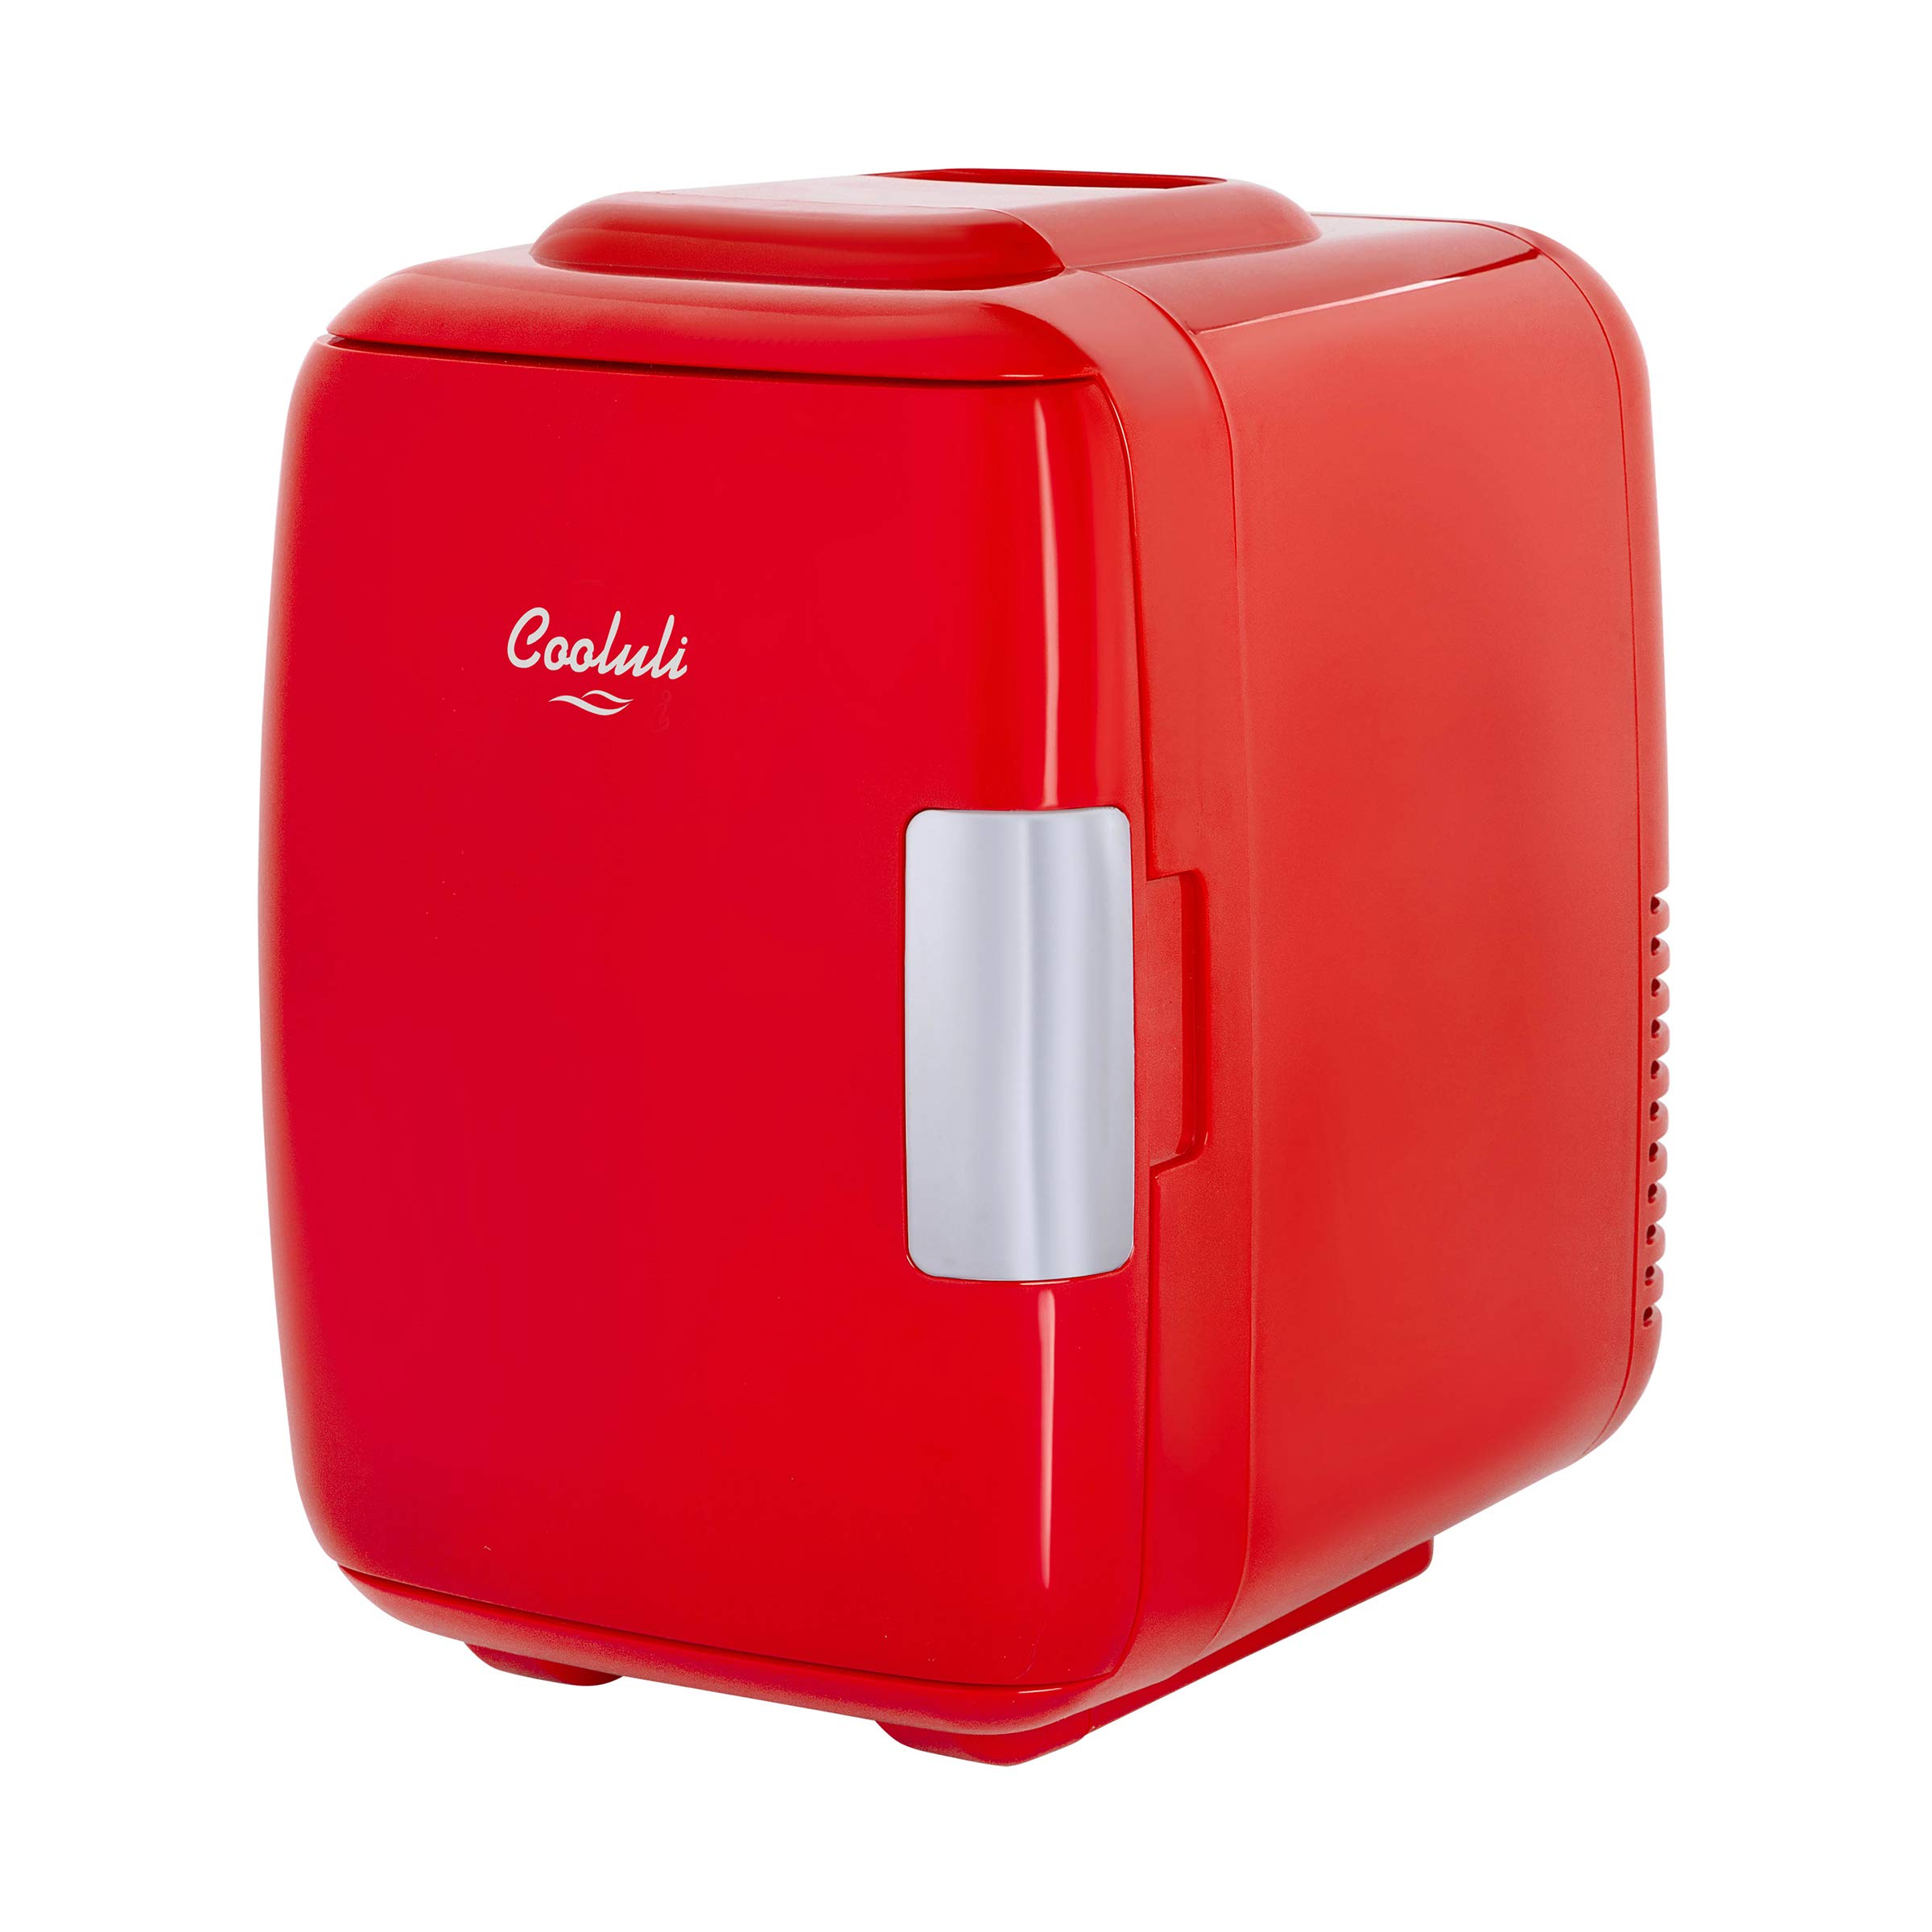 Cooluli Classic Red 4 Liter Compact Cooler Warmer Mini Fridge with AC/DC/USB Power - Great for Bedroom, Office, Car, Dorm - Portable Makeup Skincare Fridge